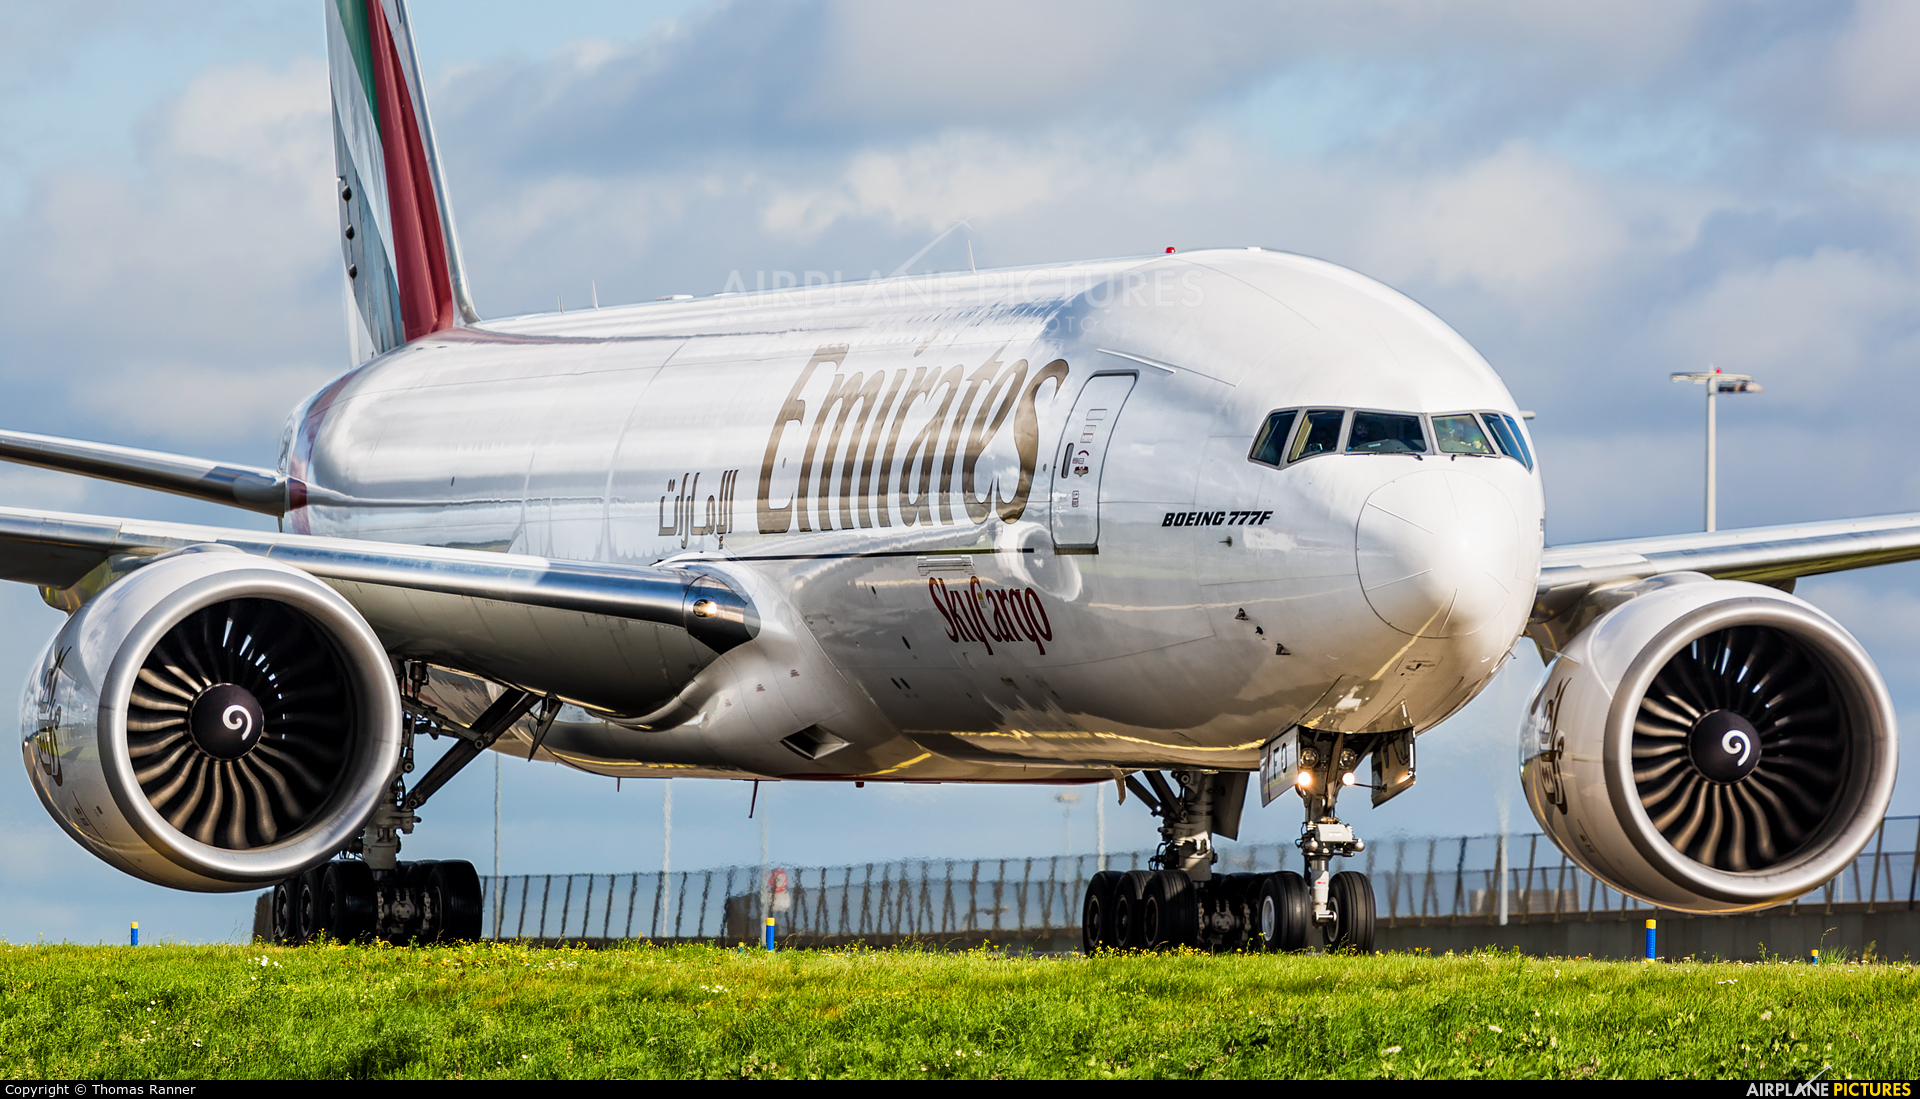 Emirates Sky Cargo A6-EFO aircraft at Amsterdam - Schiphol